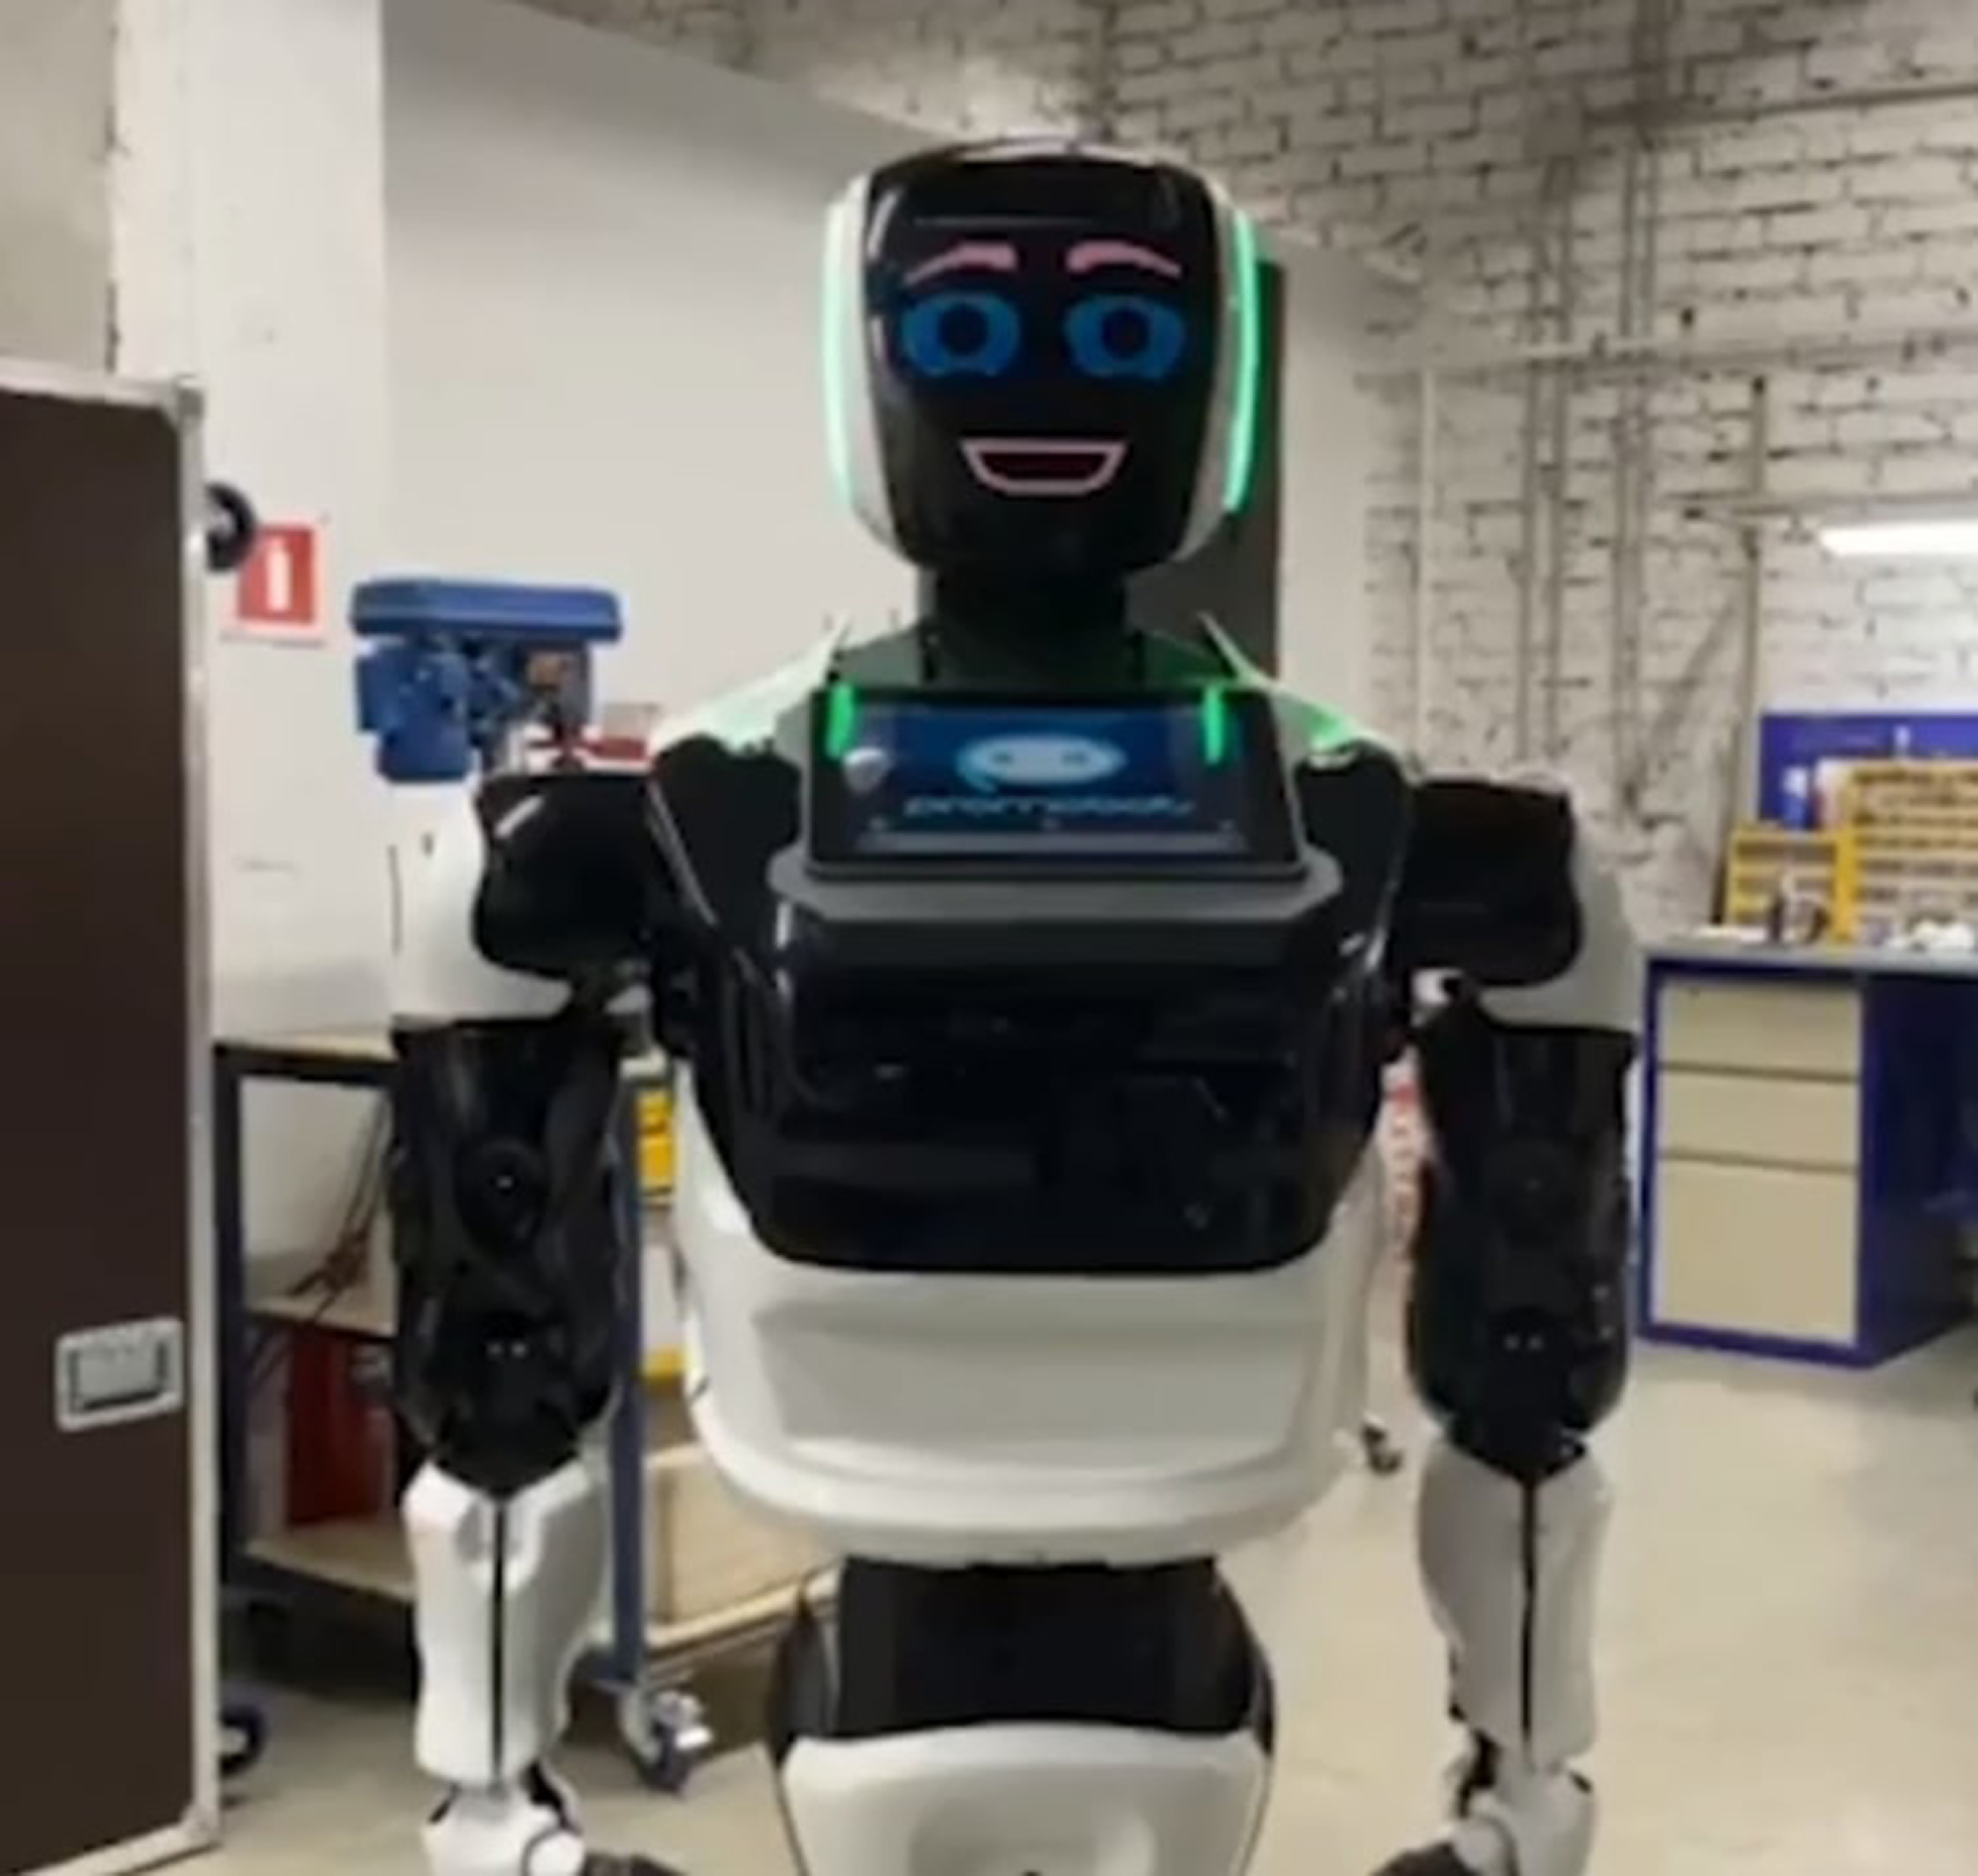 Read more about the article Robot Makes Bid To Become Russian Governor